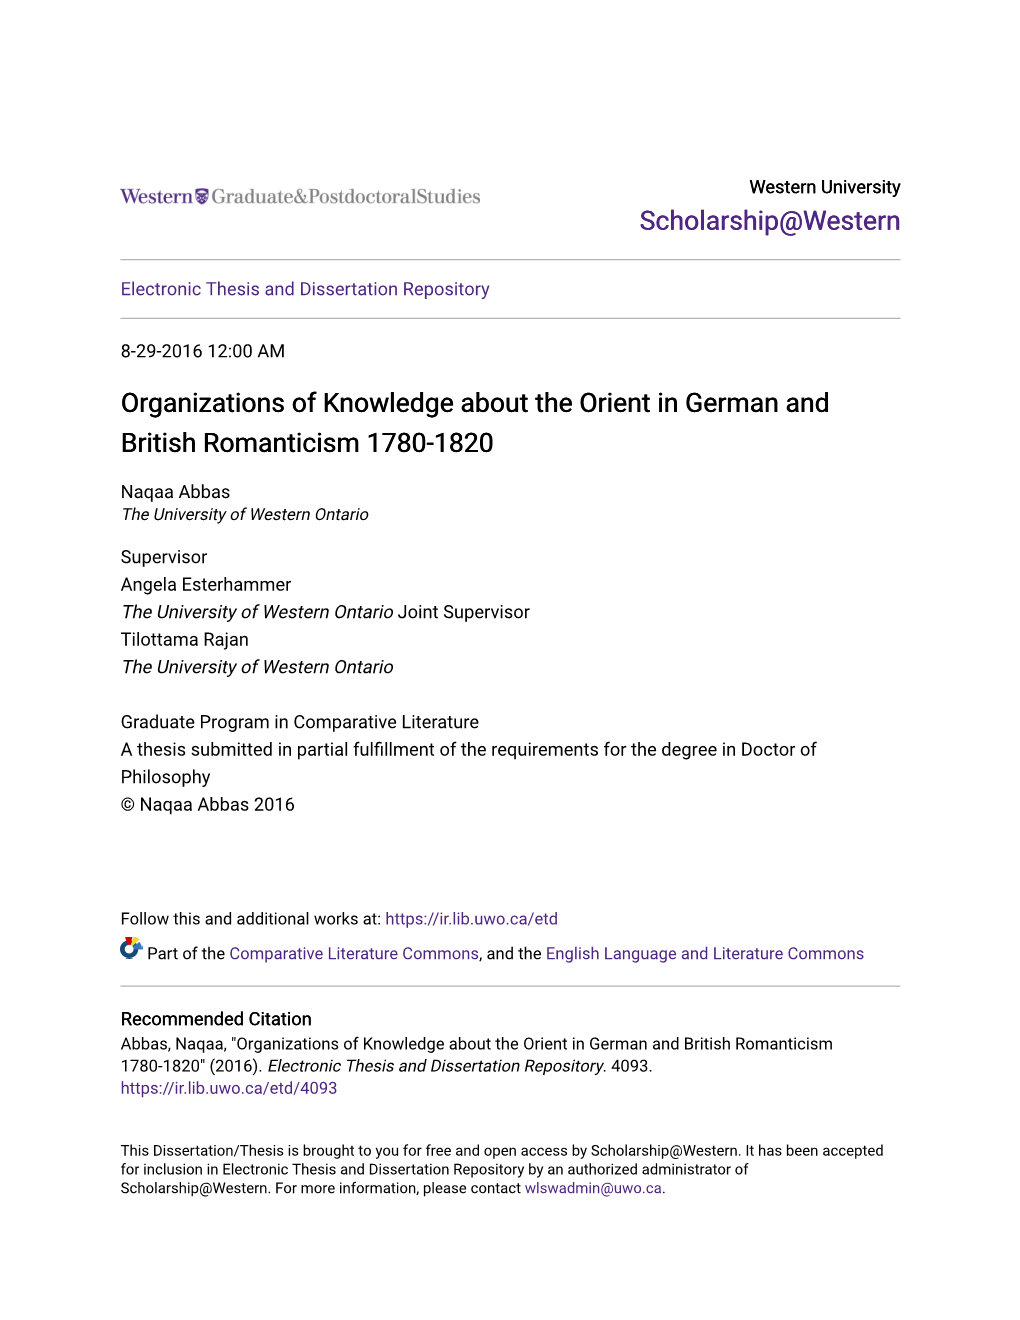 Organizations of Knowledge About the Orient in German and British Romanticism 1780-1820